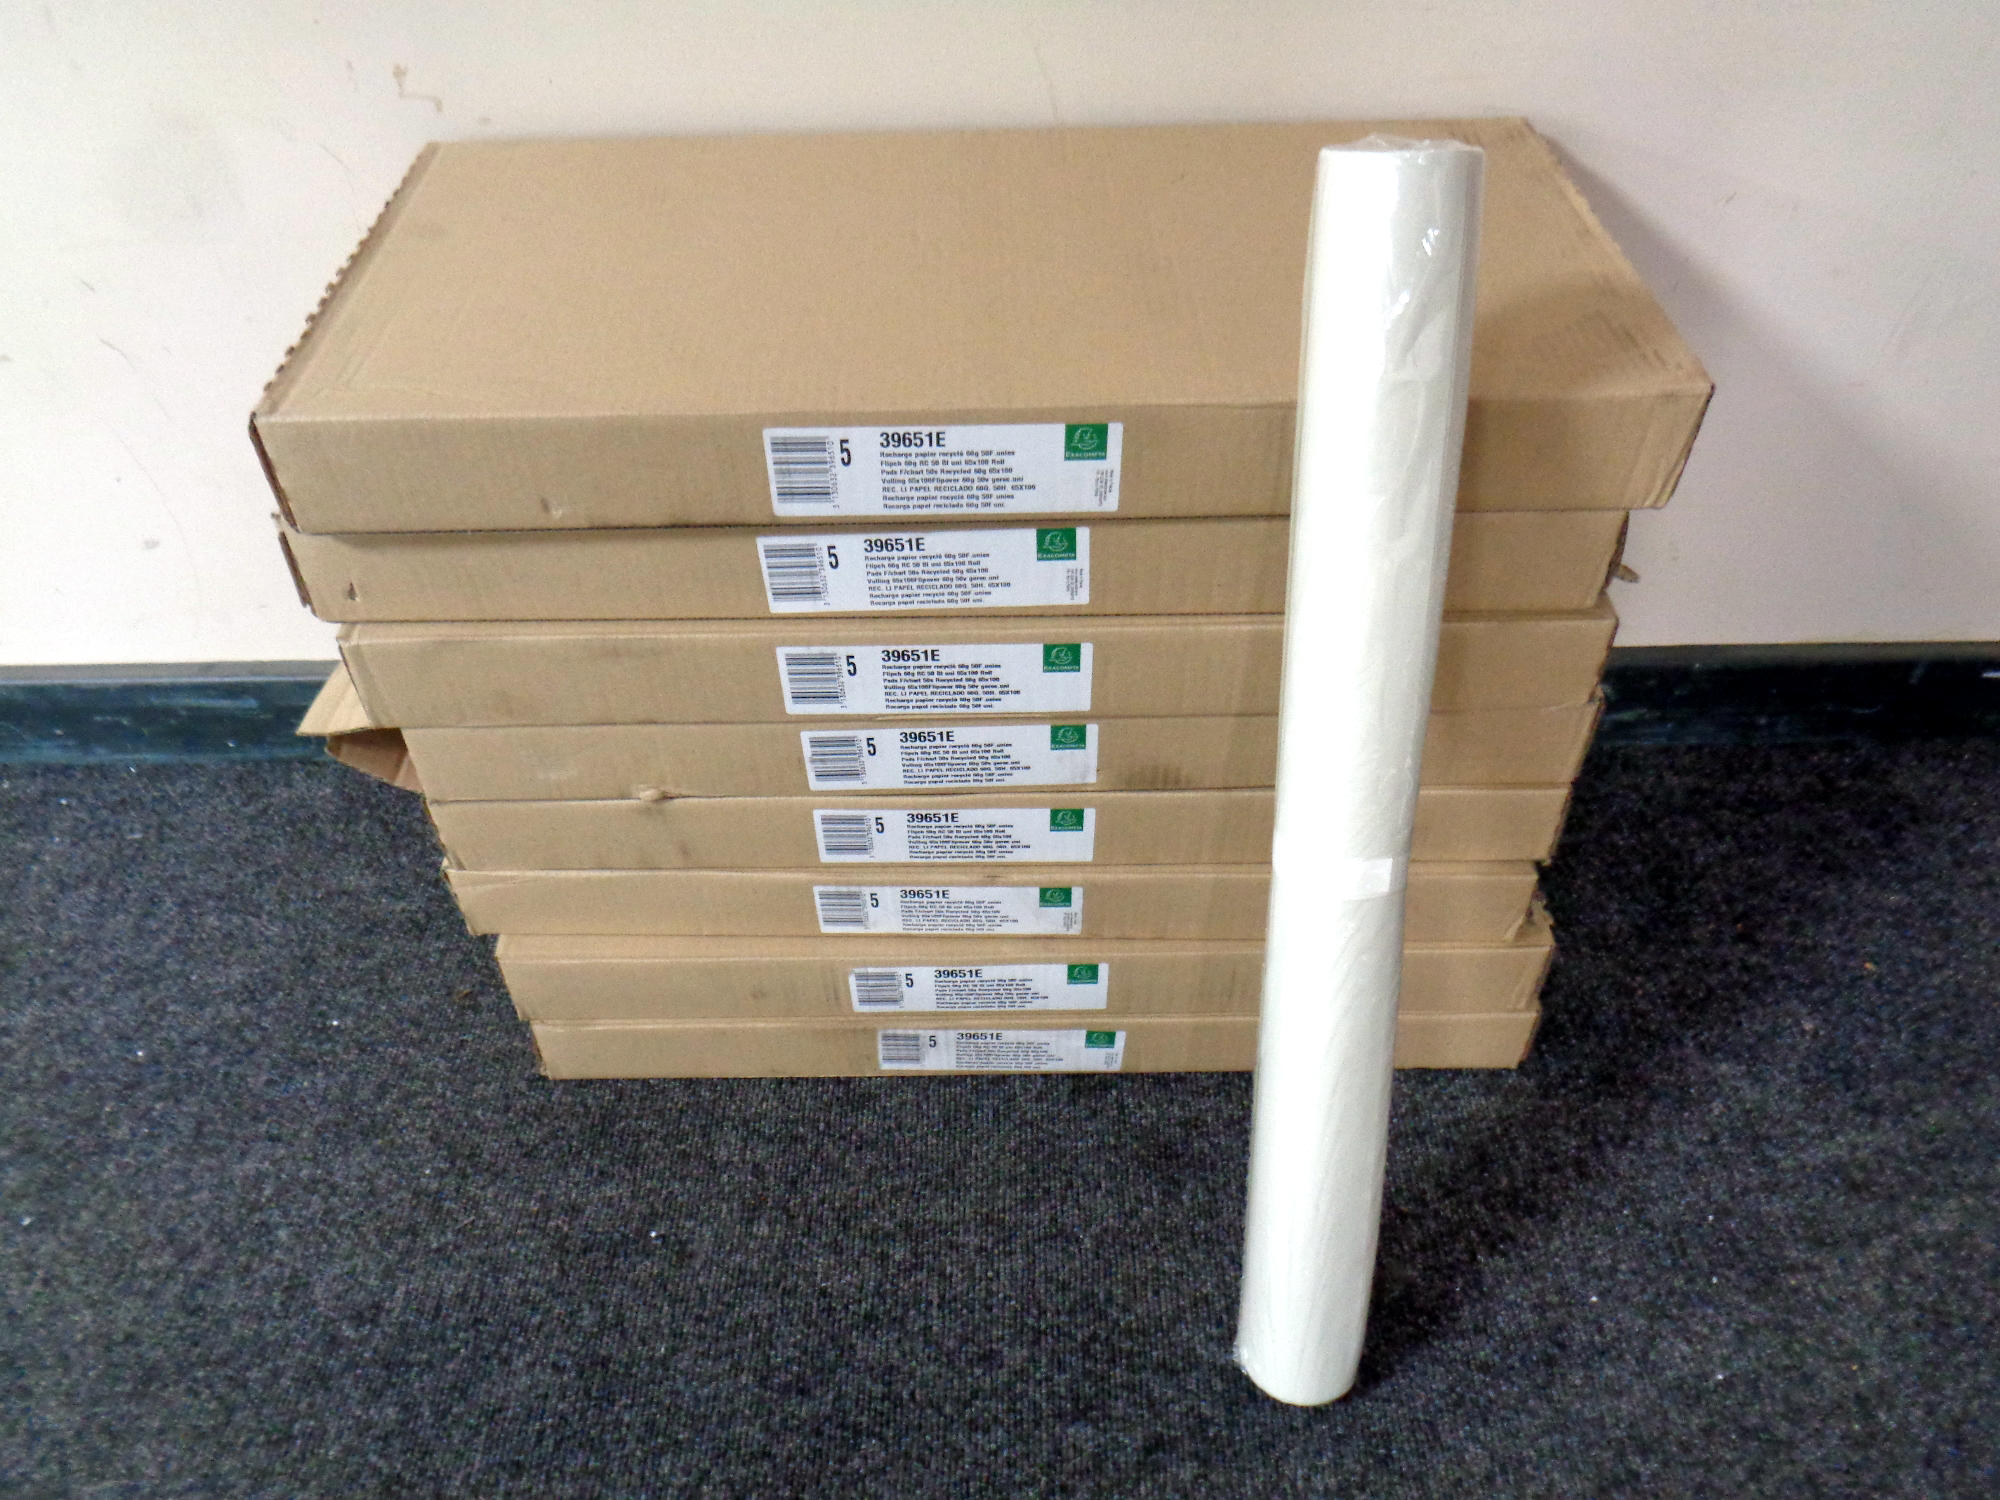 Eight boxes containing rolls of recharge paper